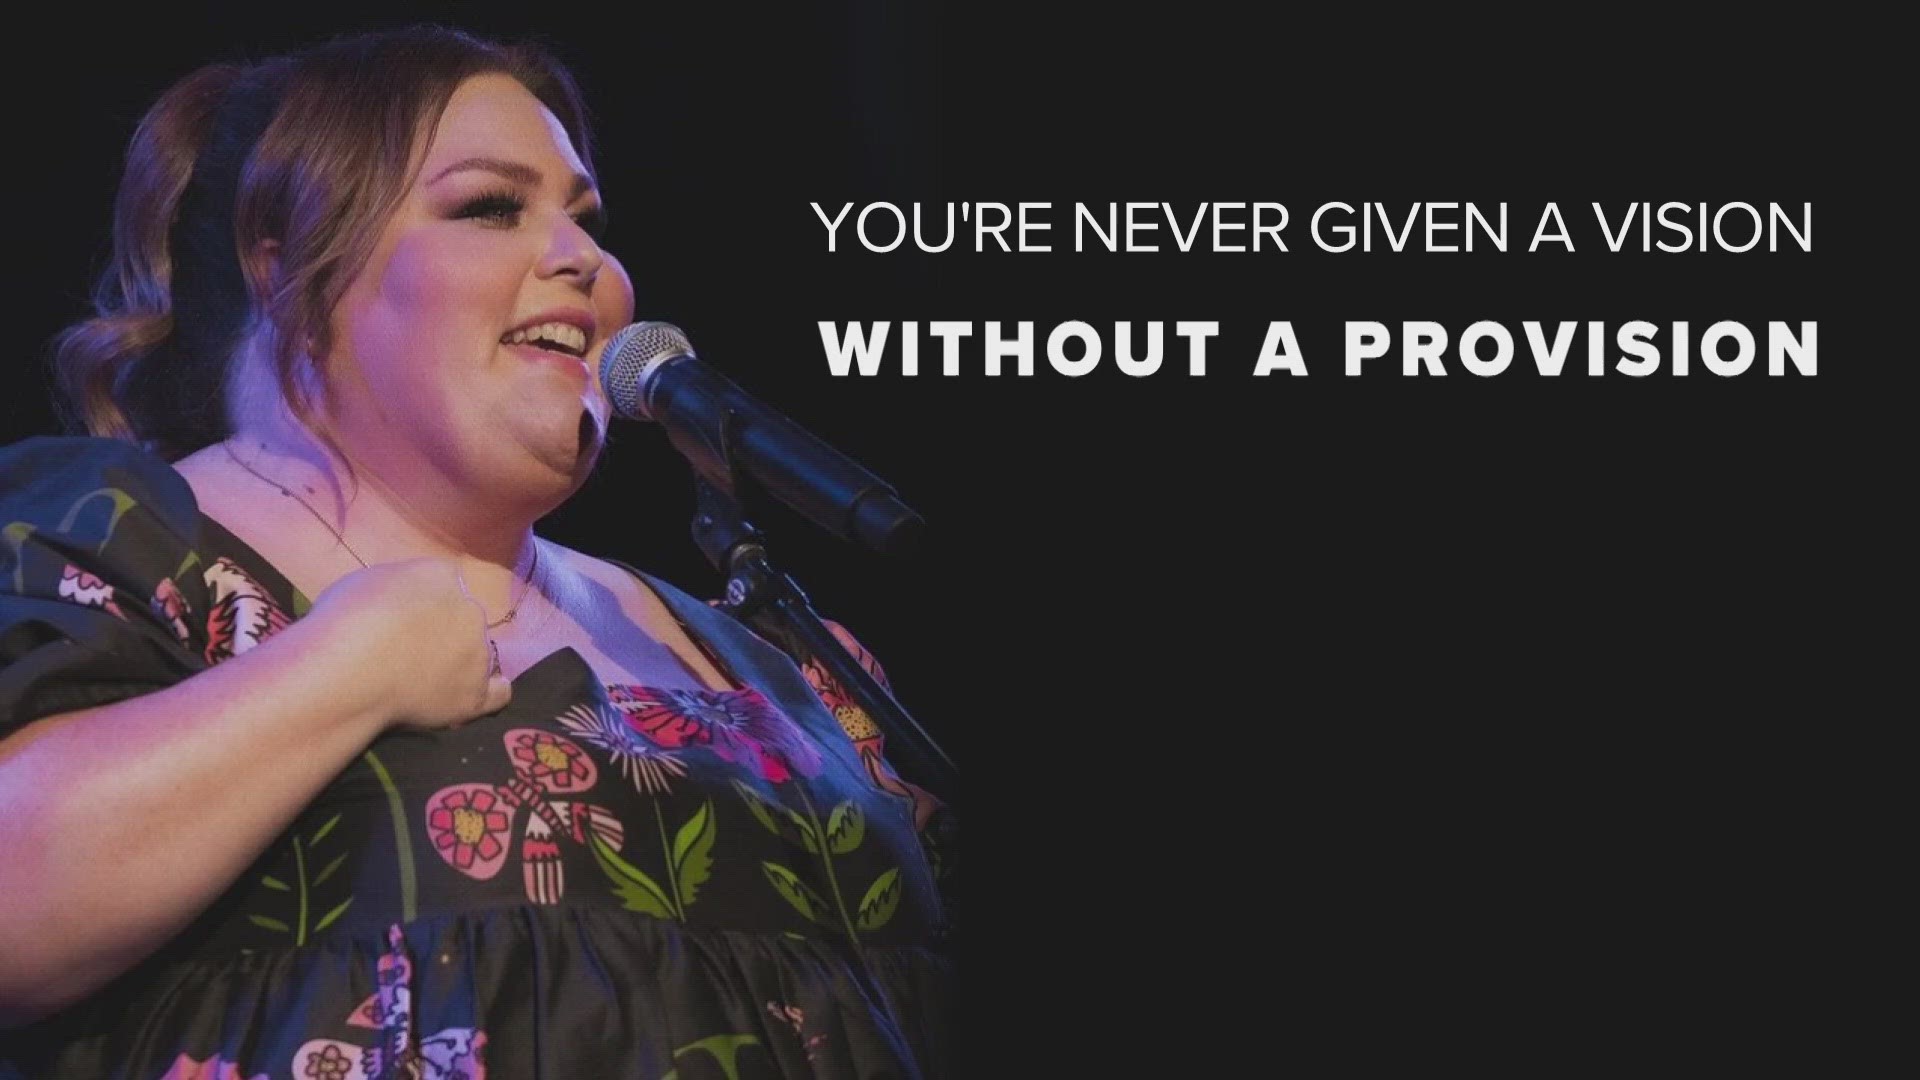 To make the pivot from preschool teacher to actress to singer, Chrissy had to deal with old demons and learn to put herself first, and she says you can, too.